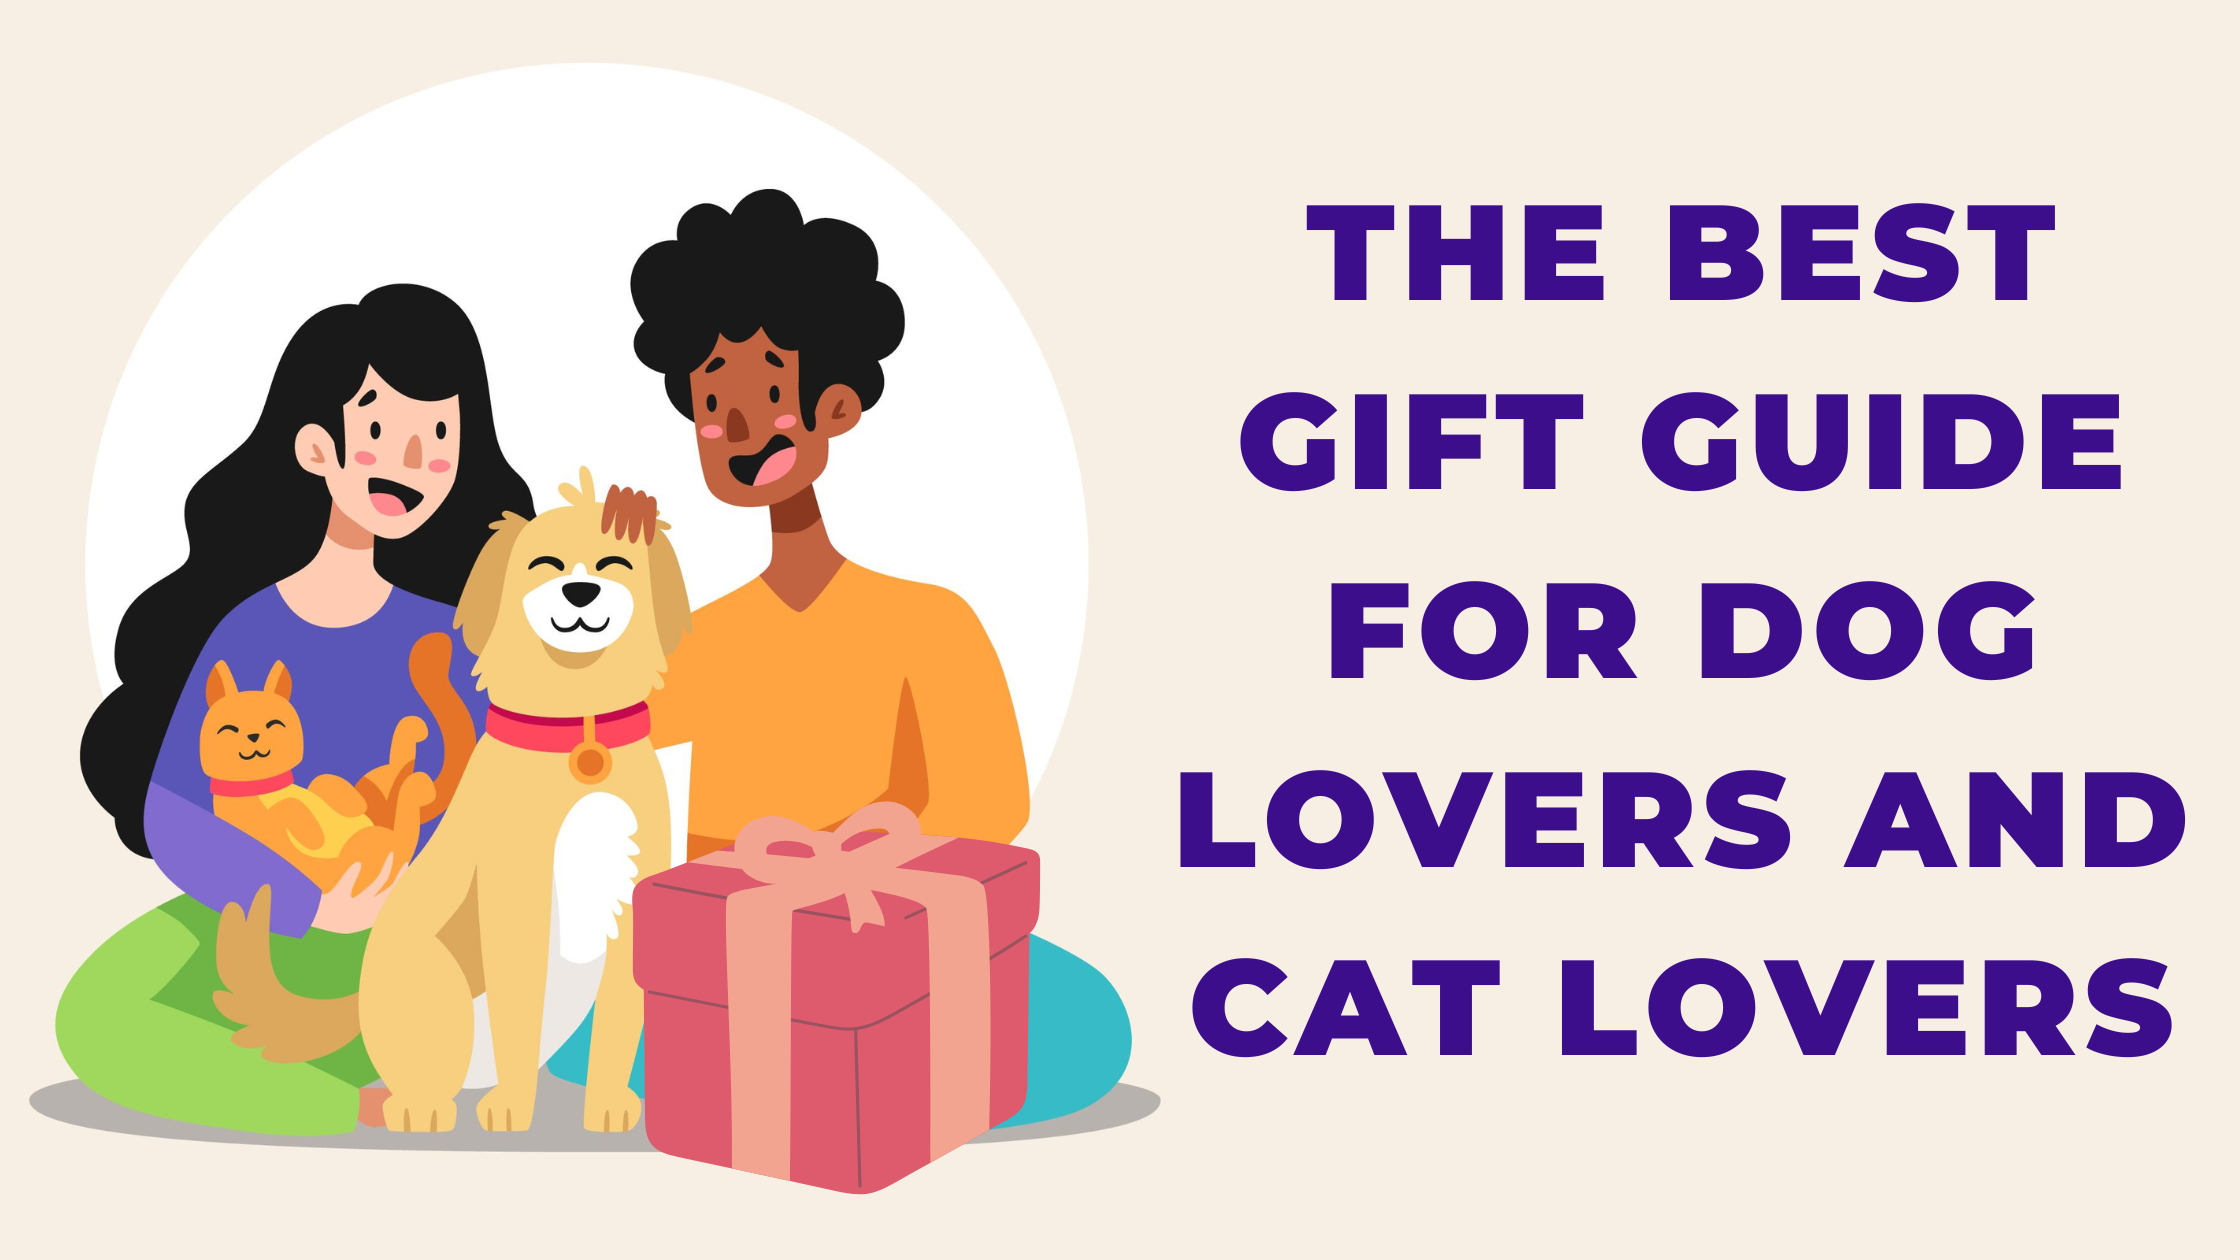 The best gift guide for dog lovers and cat lovers